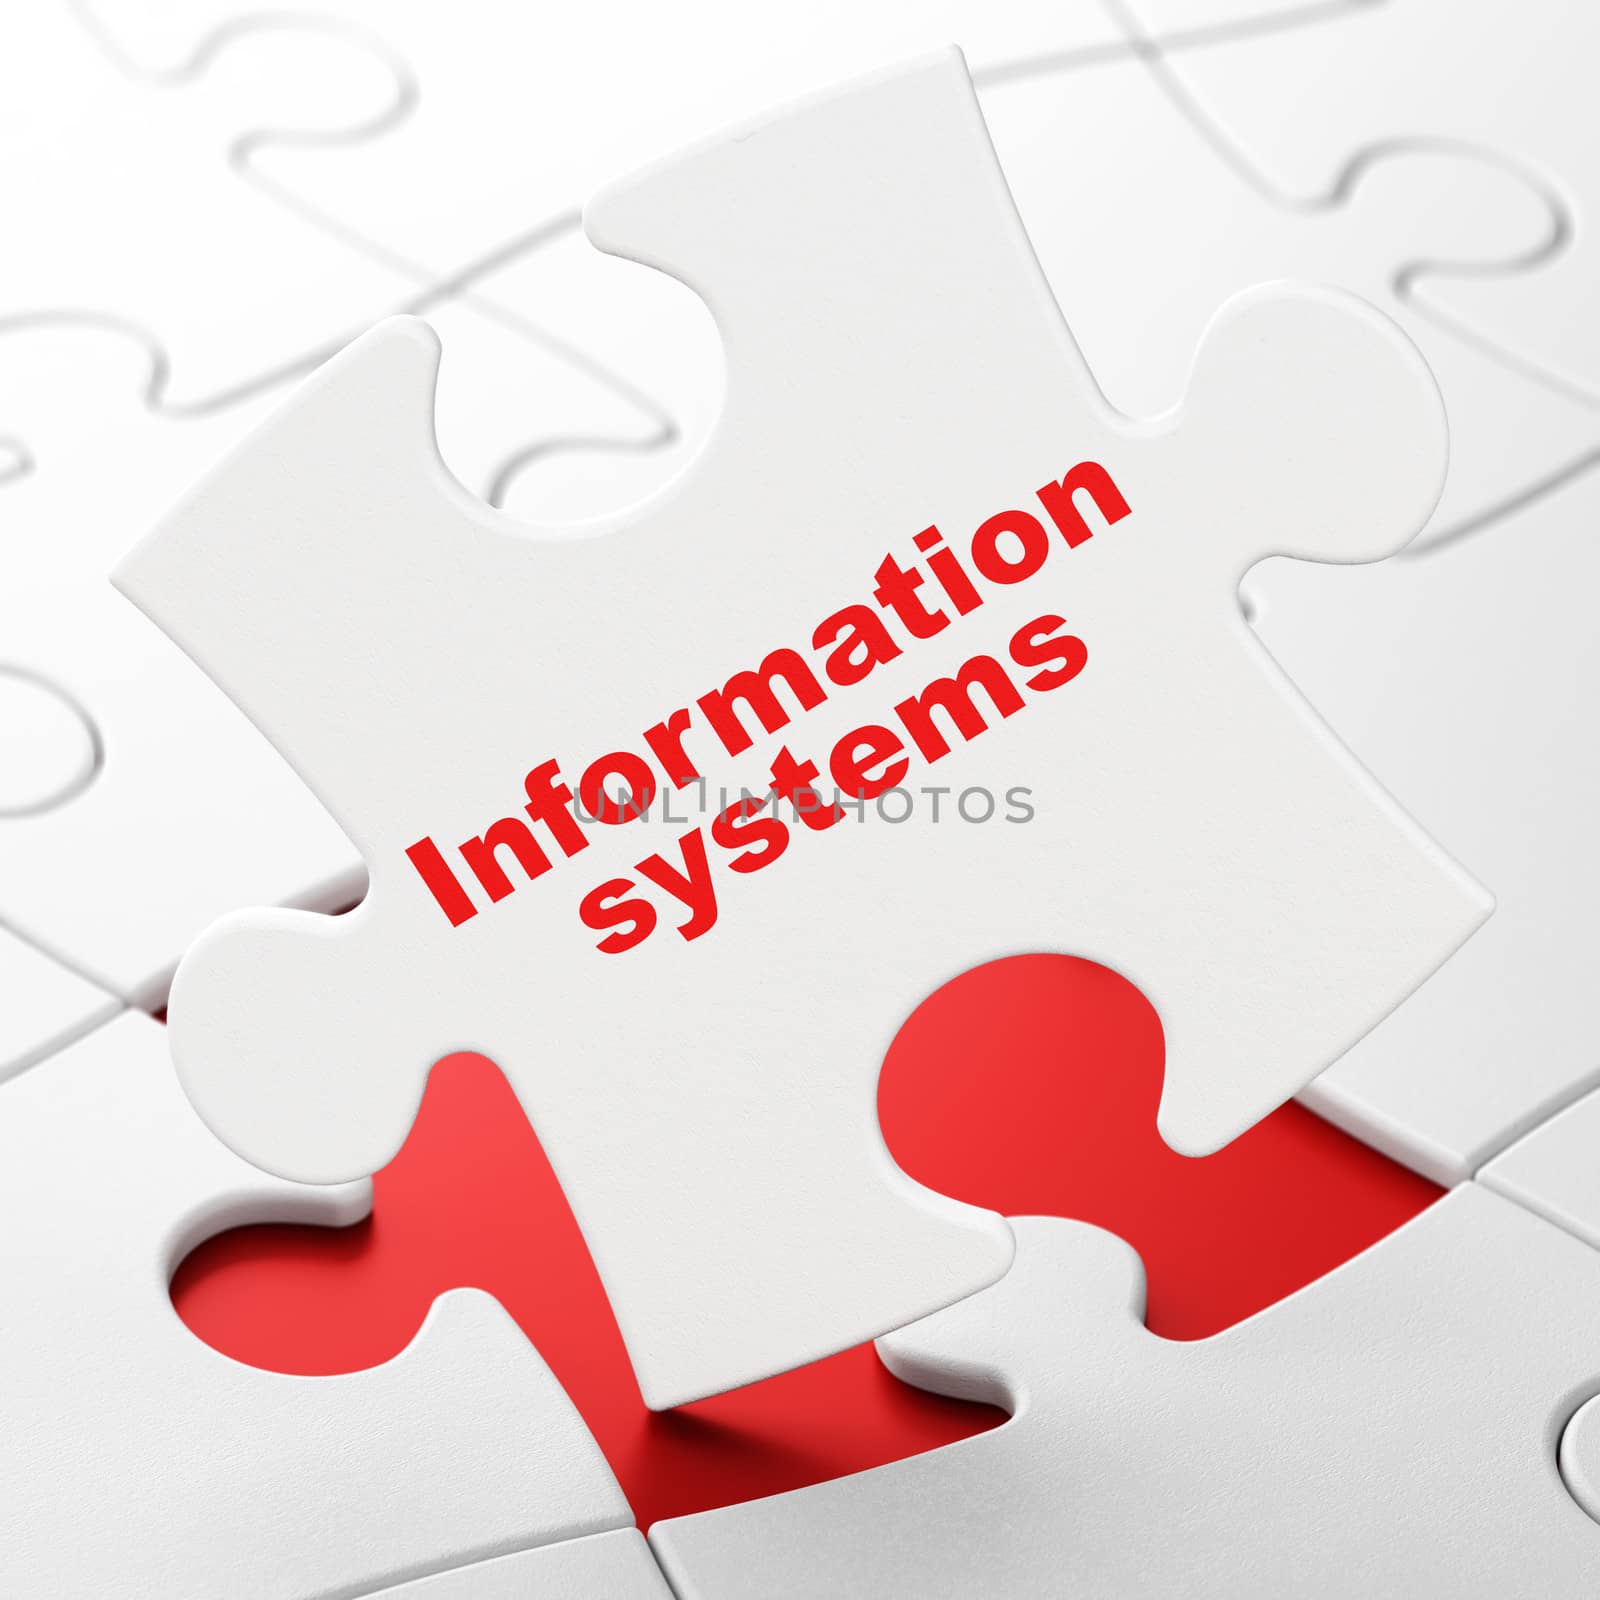 Information concept: Information Systems on White puzzle pieces background, 3d render